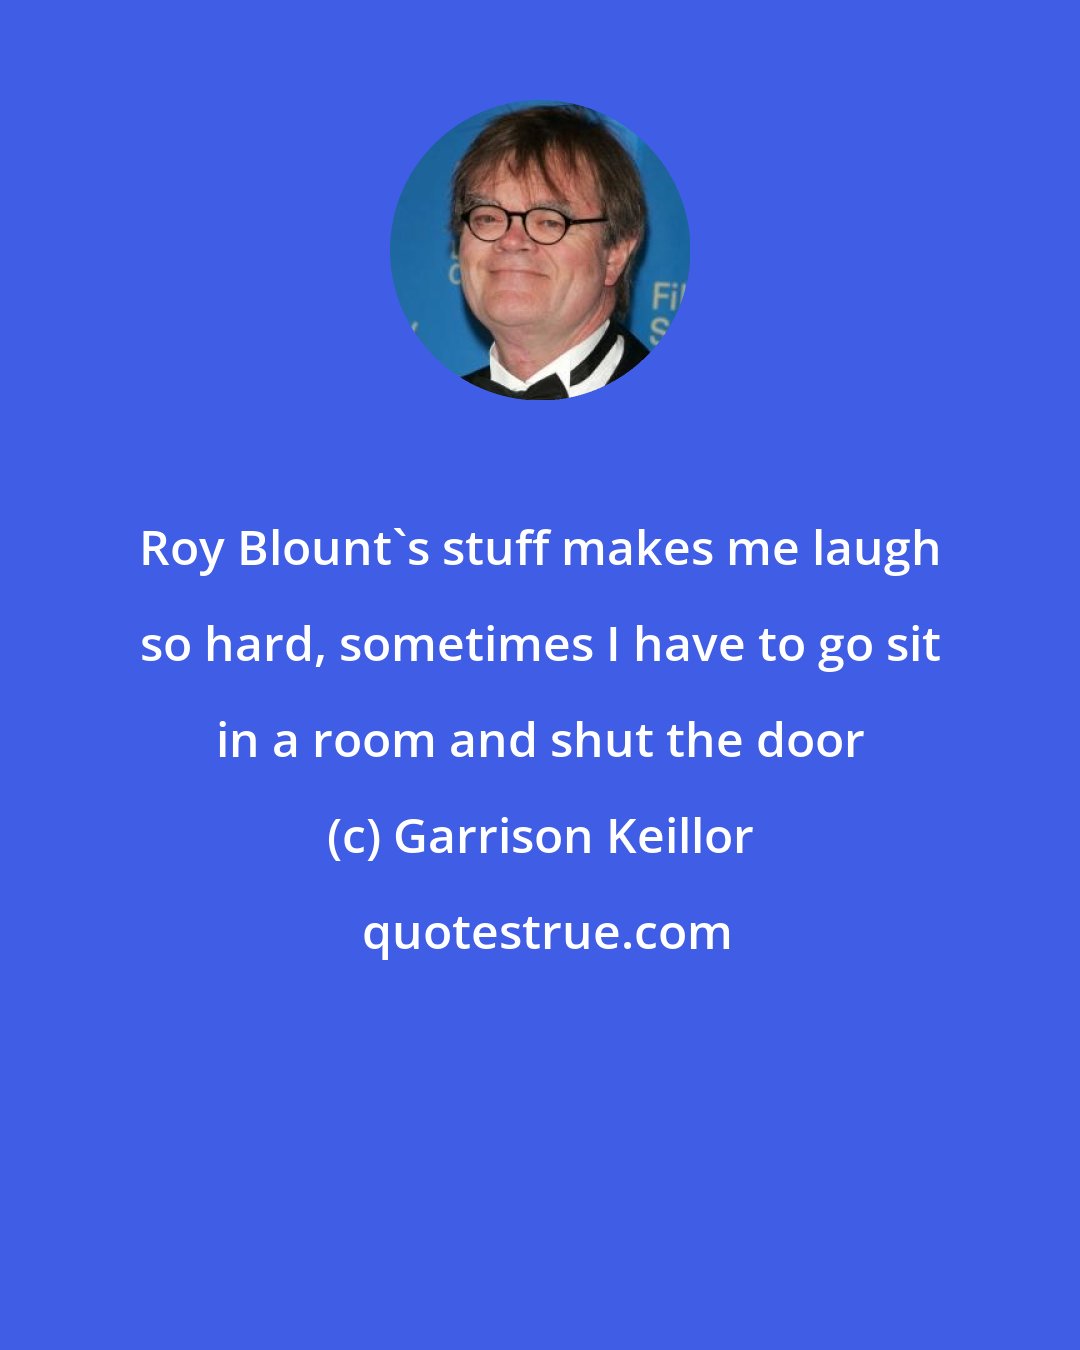 Garrison Keillor: Roy Blount's stuff makes me laugh so hard, sometimes I have to go sit in a room and shut the door